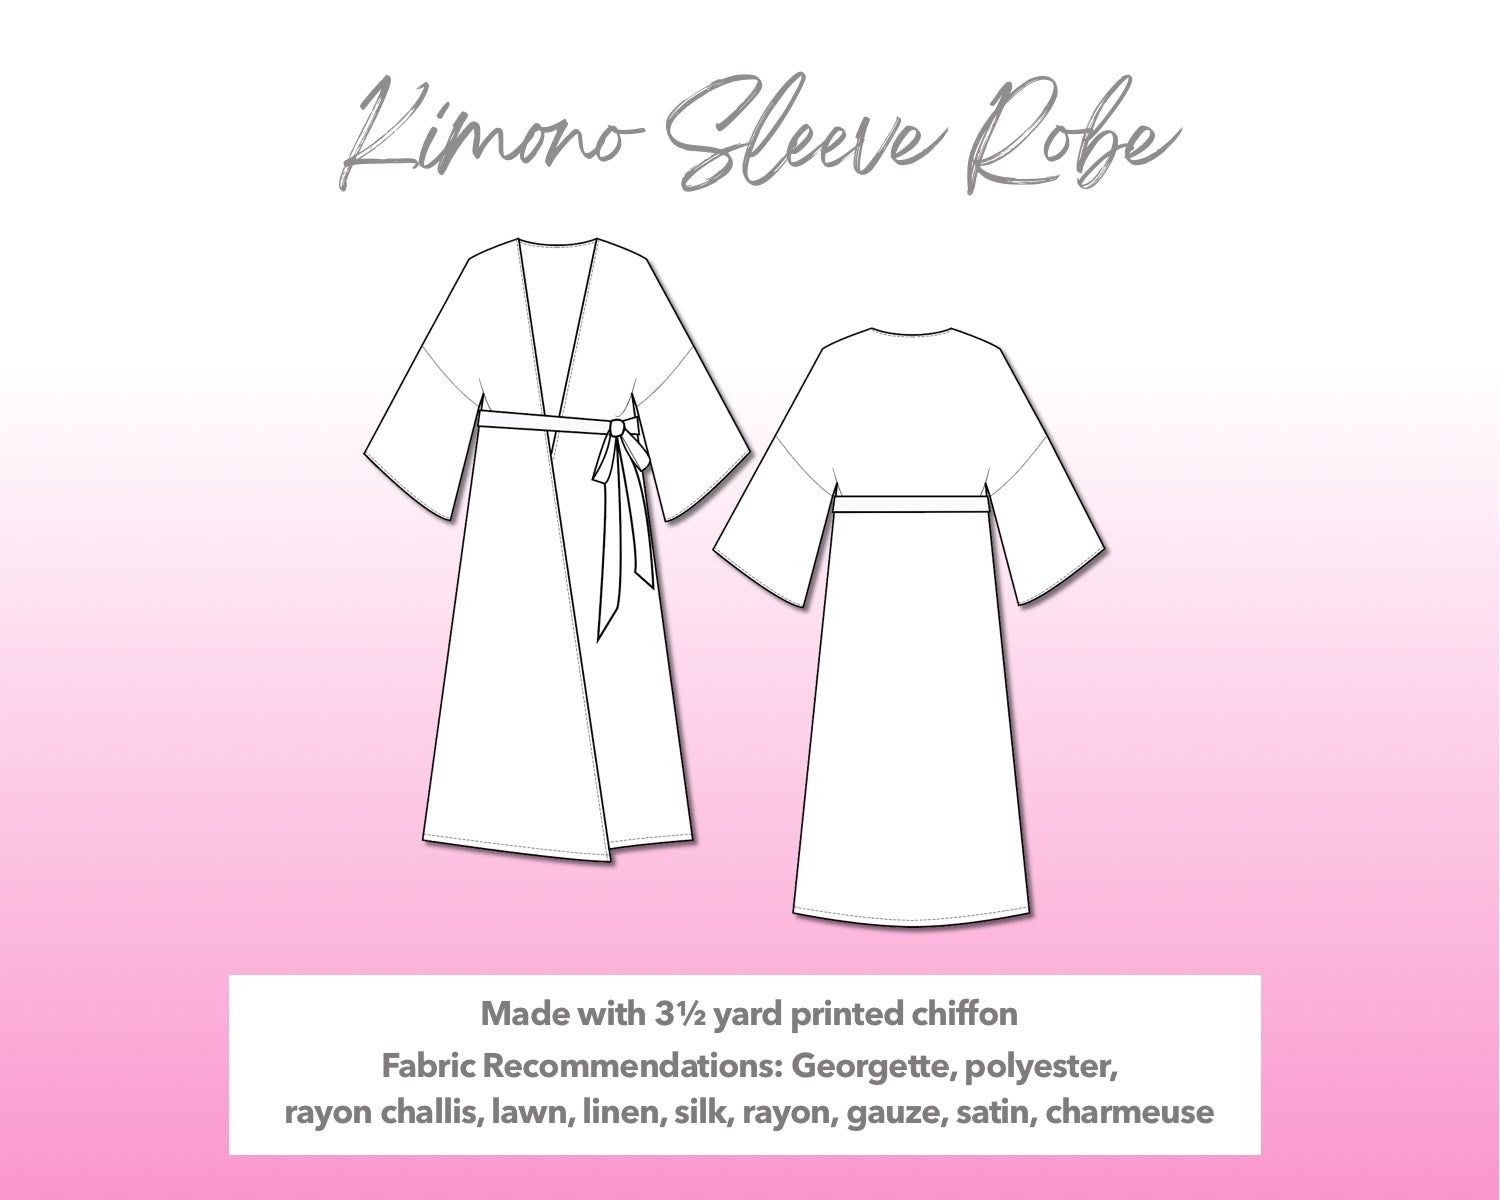 Illustration and detailed description for Kimono Sleeve Robe sewing pattern.